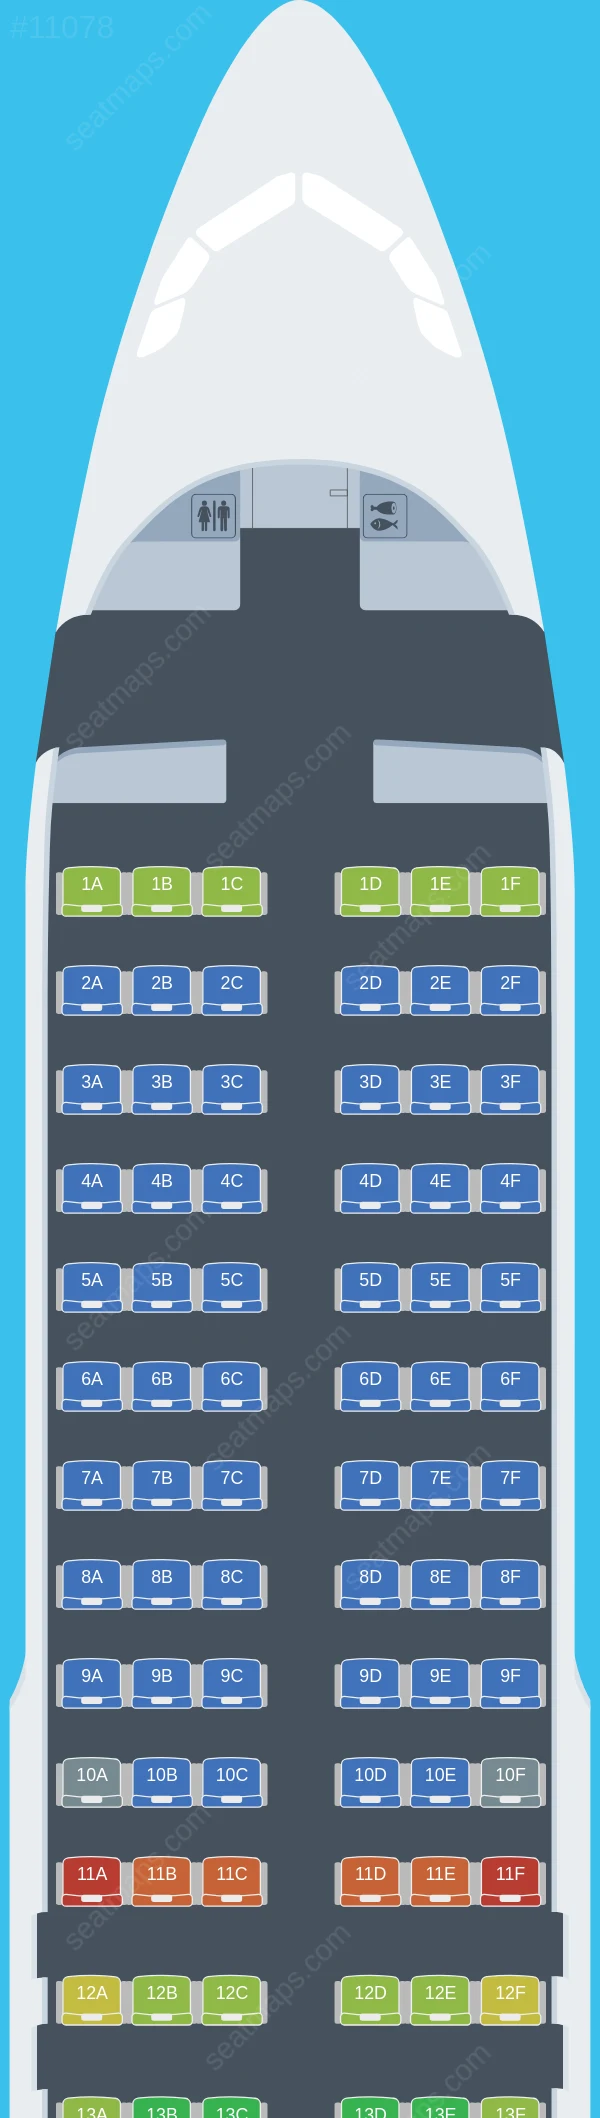 flyCAA Airbus A320-200 V.1 seatmap preview